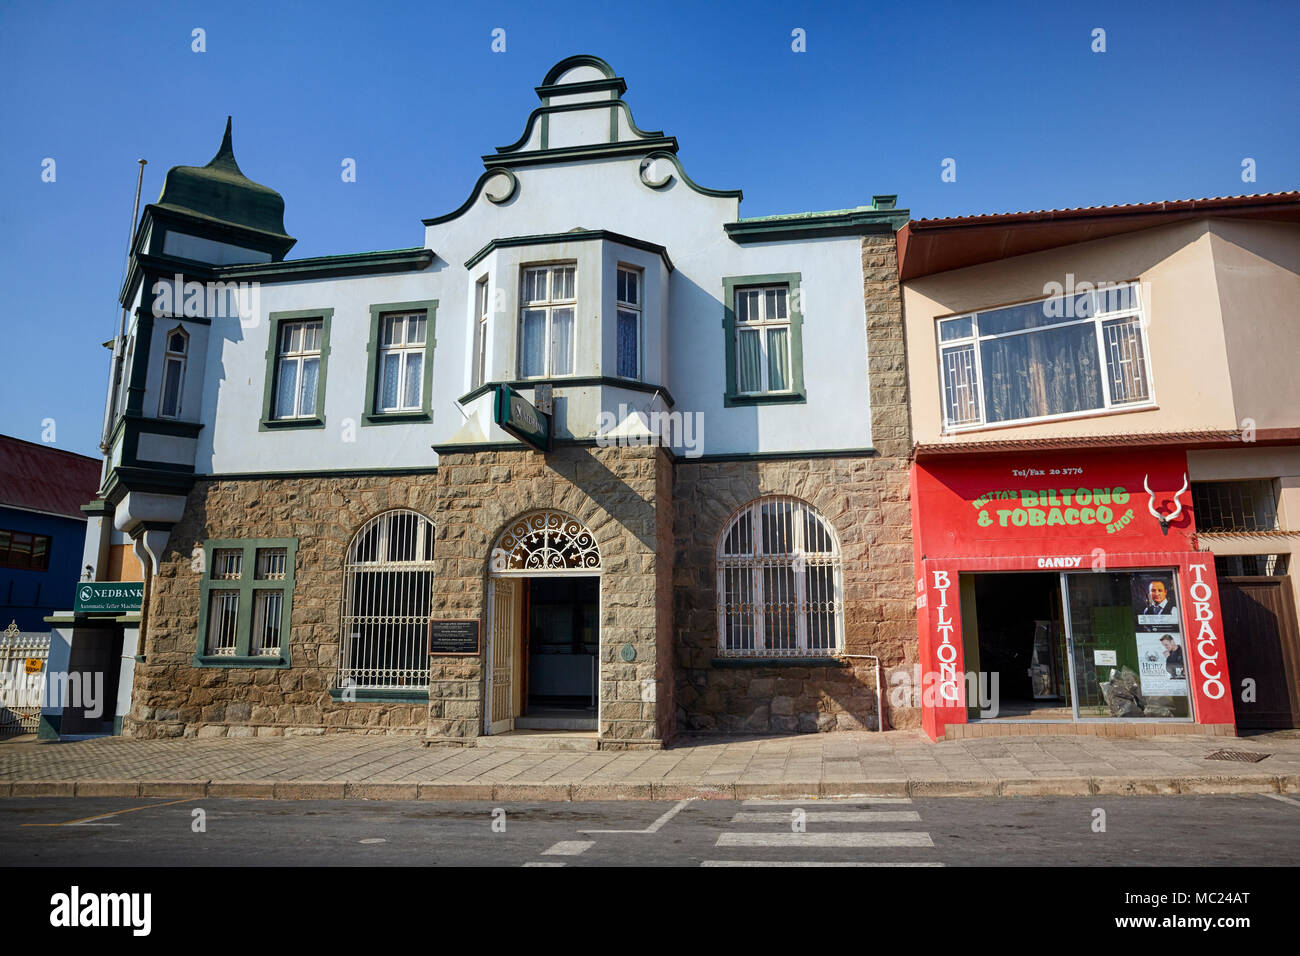 Biltong and Tobacco store on Bismarck Street in Luderitz, Namibia, Africa Stock Photo